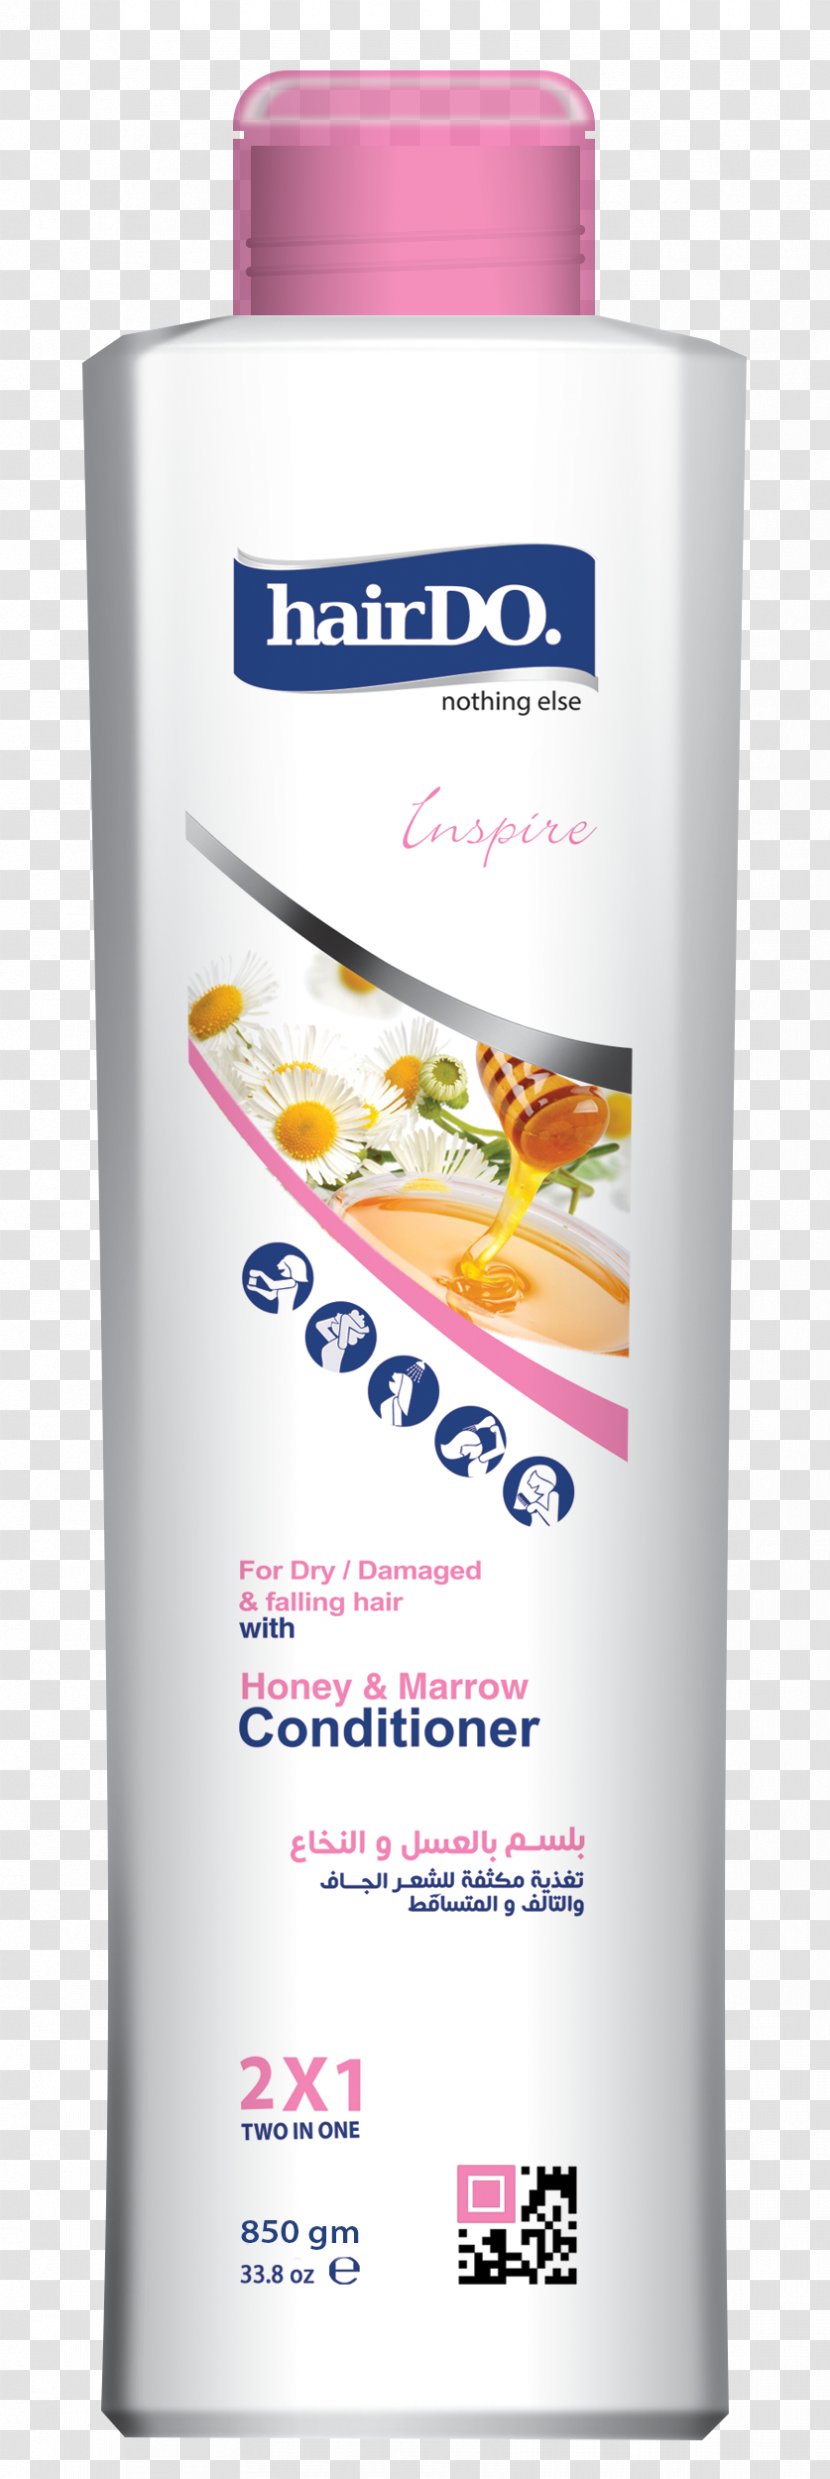 Lotion بوبانا Cosmetics Cosmeceutical Product - Elsuppliercom - Cosmetic Company Transparent PNG